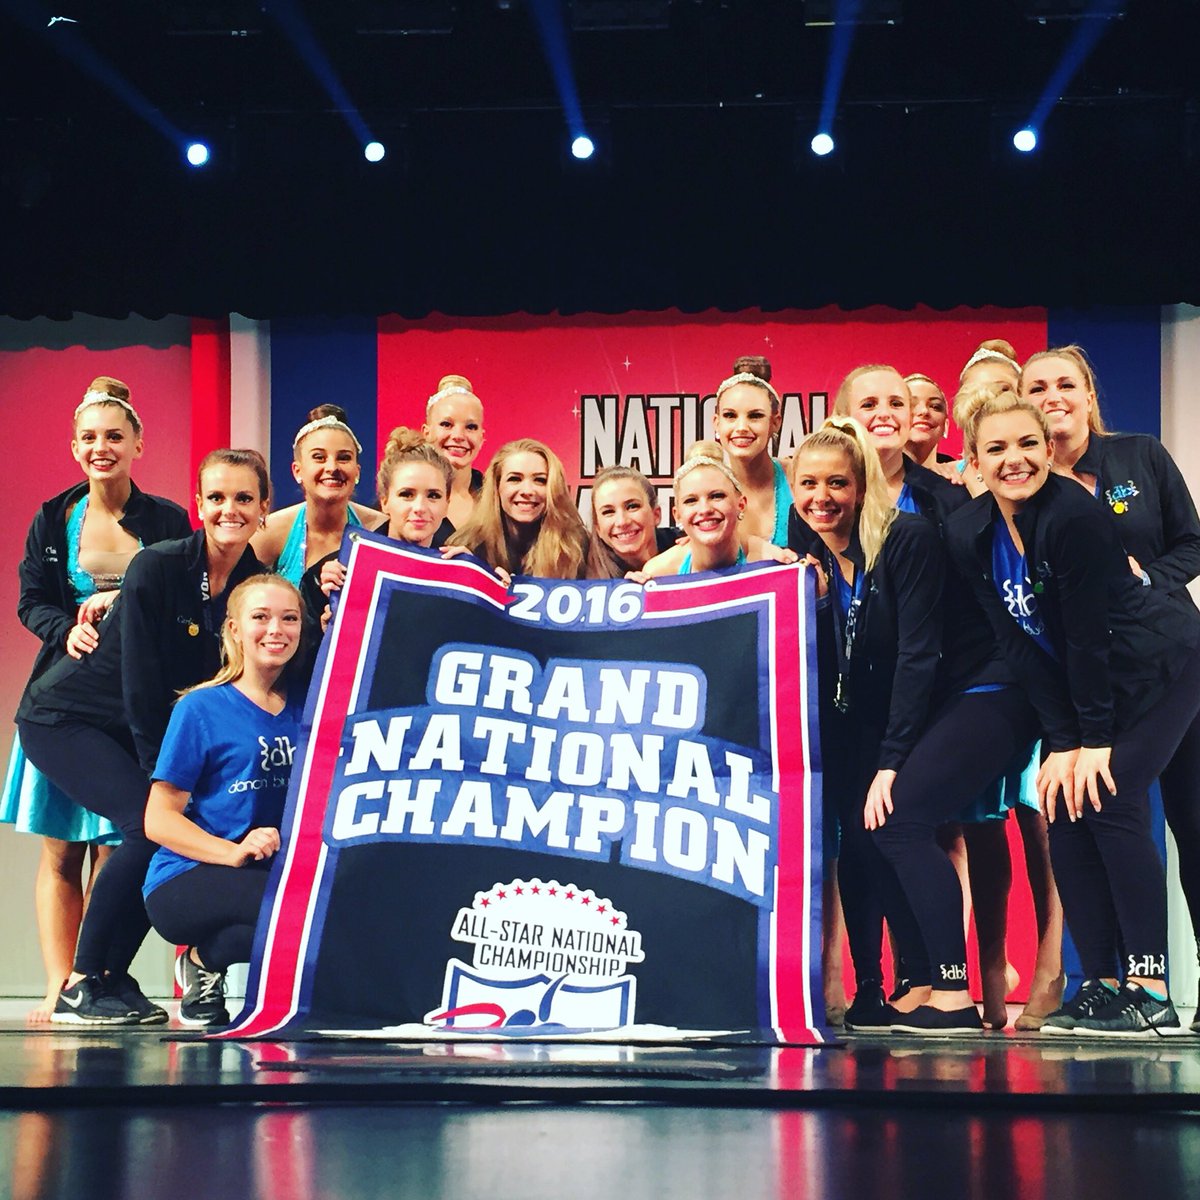 Nda The Dancin Bluebonnets Wrapped Up The Competition By Capturing The Grand National Championship Title Ndanationals T Co Zq02xce68u